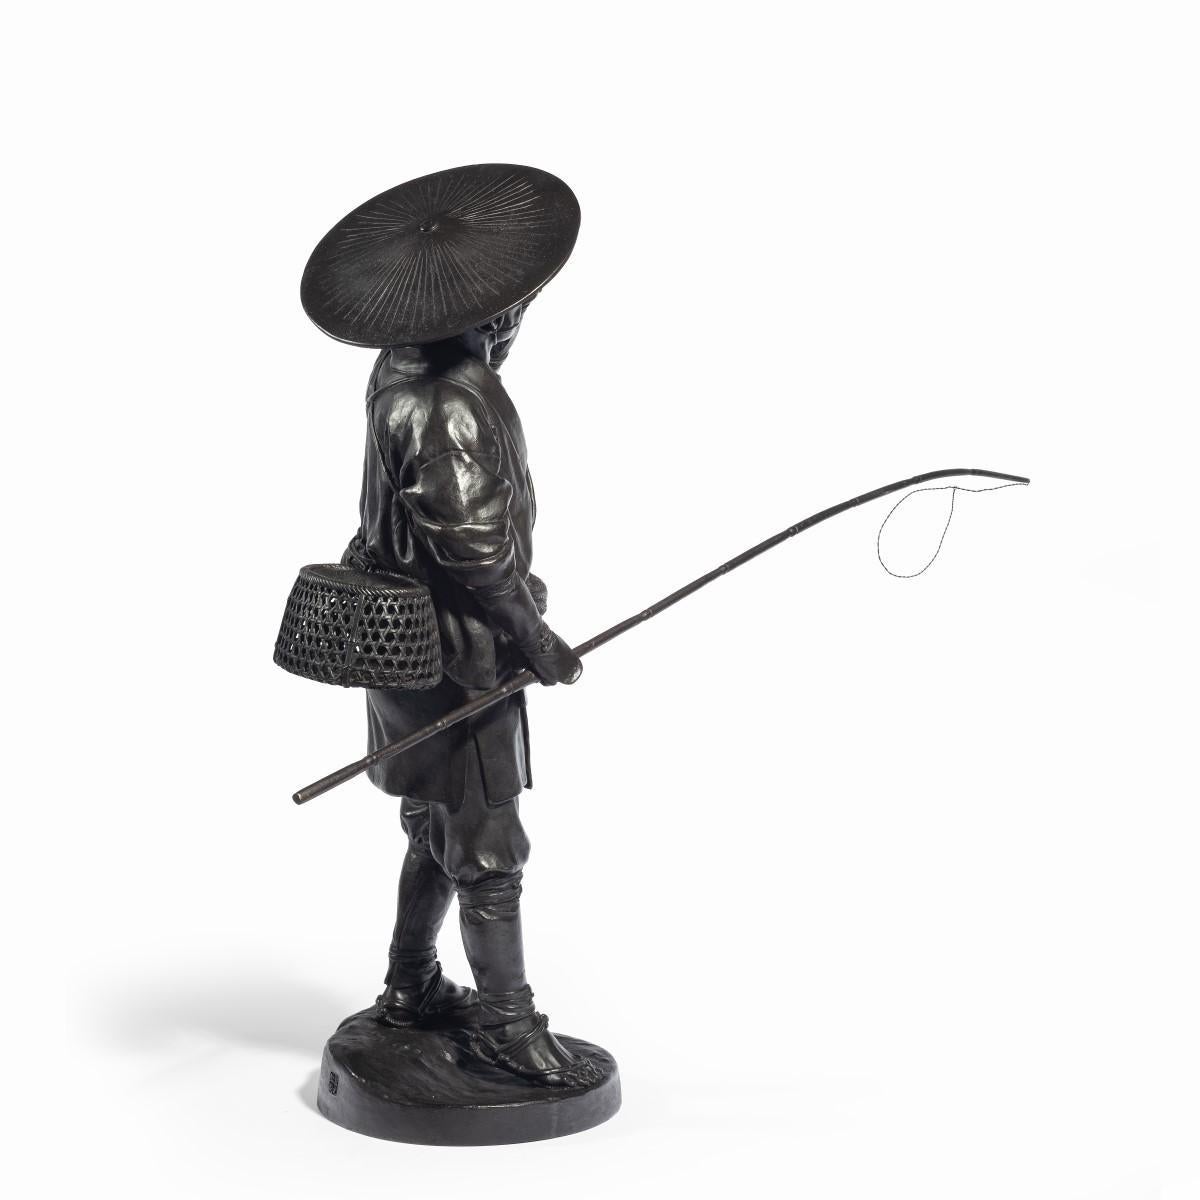 A Meiji period bronze of a cricket catcher, shown holding a whistle to his mouth with his left hand and a long rod in his right hand, wearing traditional clothing with a wide-brimmed hat and a creel slung across his back, signed in a seal. Japanese,